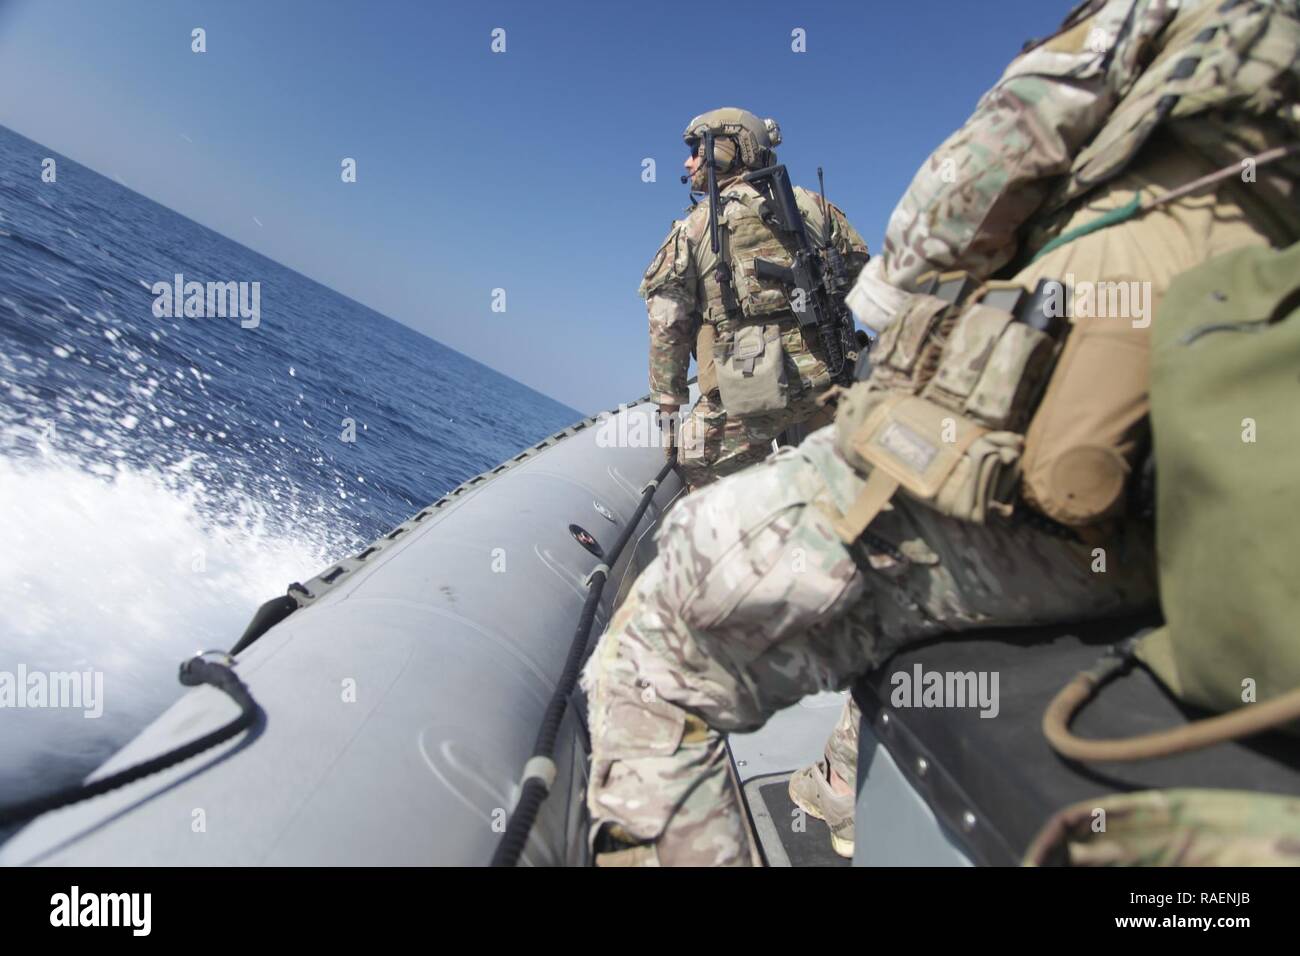 GULF OF OMAN (Dec. 13, 2018) U.S. Coast Guard Maritime Security Response Team personnel train on a rigid-hull inflatable boat from the Cyclone-class coastal patrol ship USS Thunderbolt (PC 12)  in the Gulf of Oman. Thunderbolt is deployed to the U.S. 5th Fleet area of operations in support of naval operations to ensure maritime stability and security in the Central Region, connecting the Mediterranean and the Pacific through the western Indian Ocean and three strategic choke points. Stock Photo